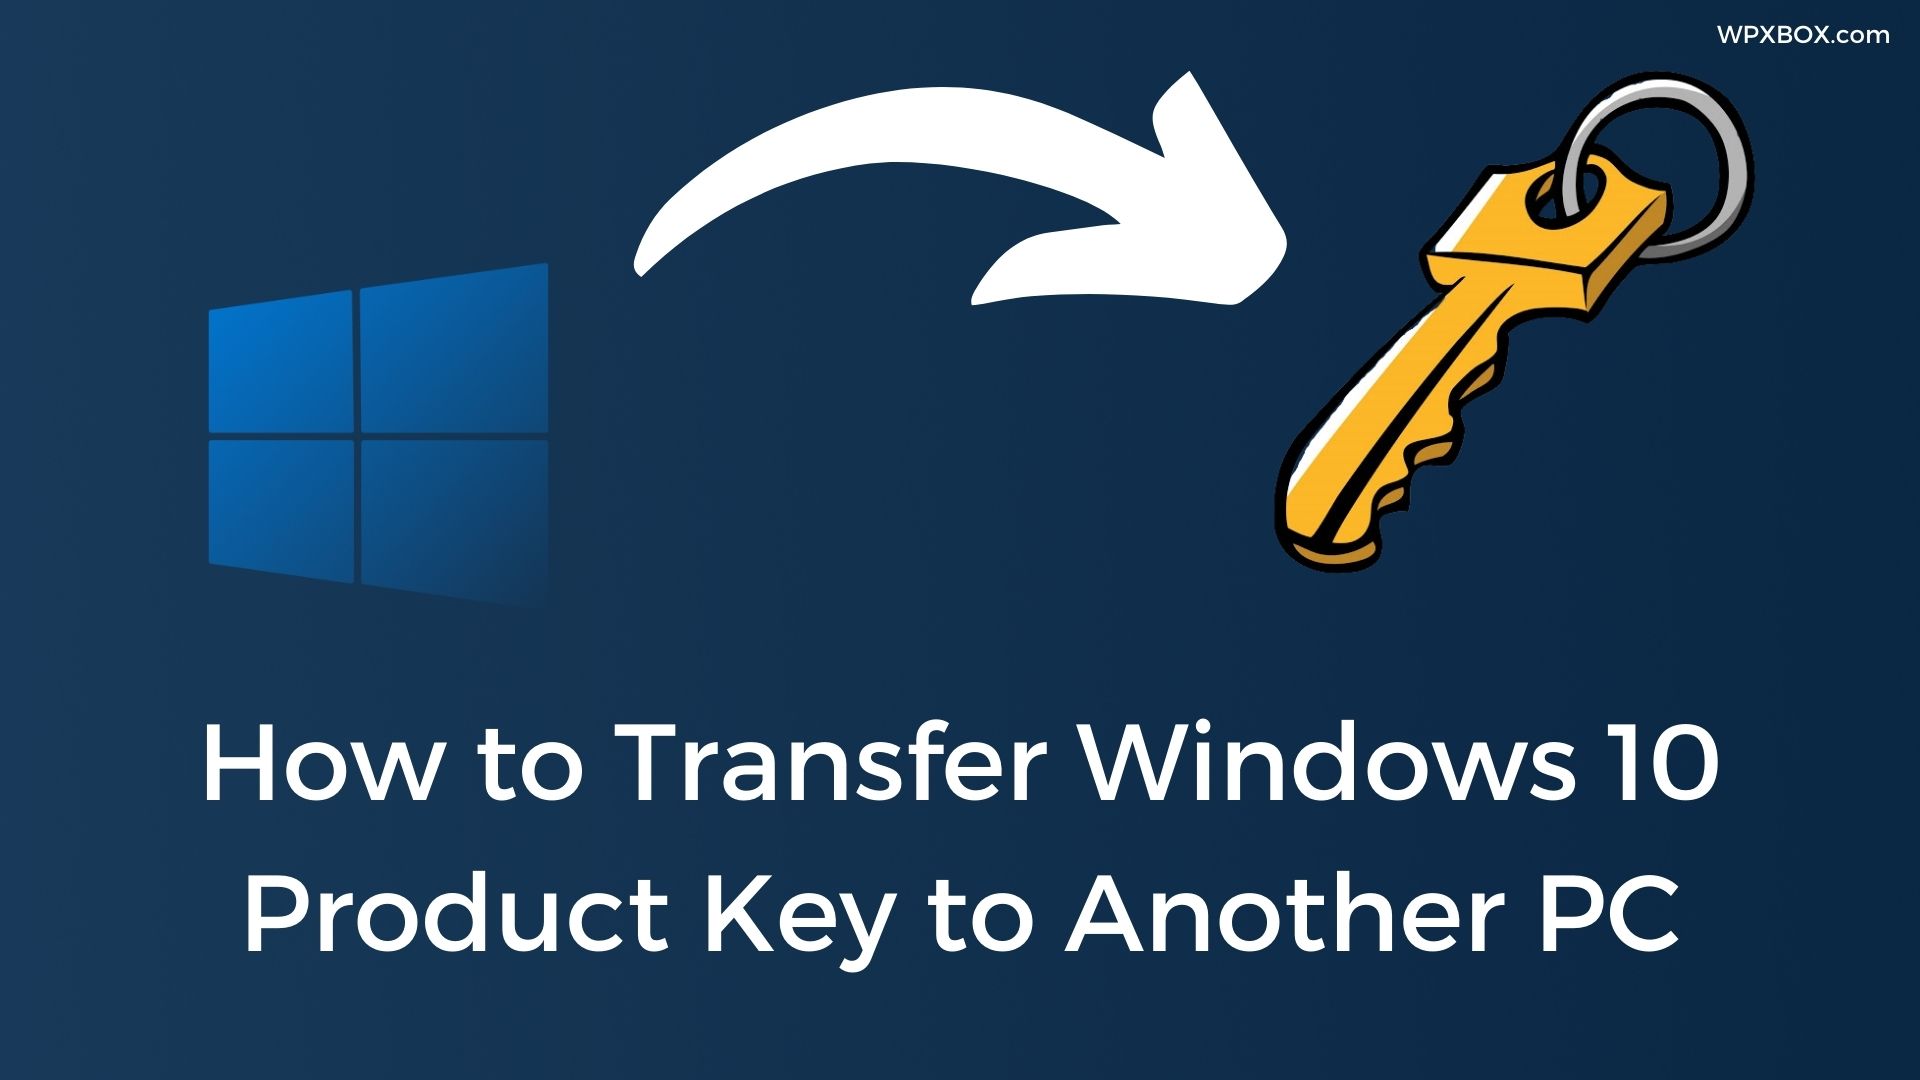 transfer windows 10 pro pack key to a new computer